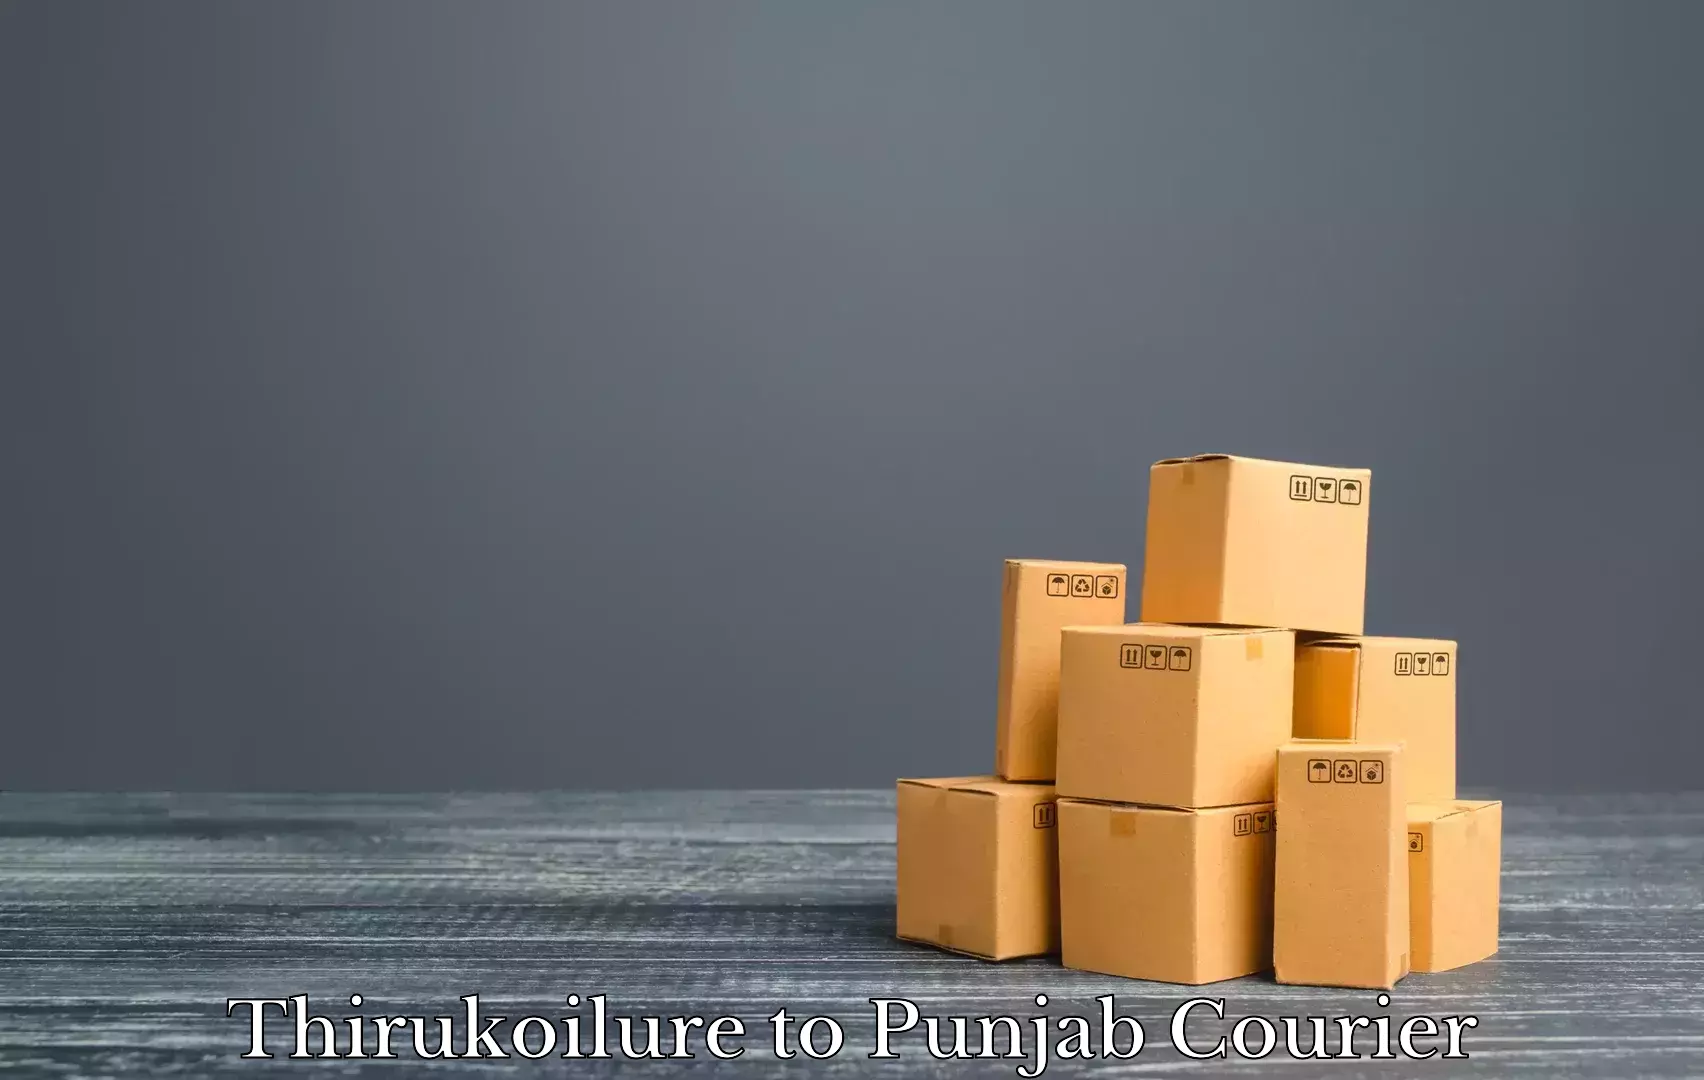 Flexible moving solutions in Thirukoilure to Amritsar